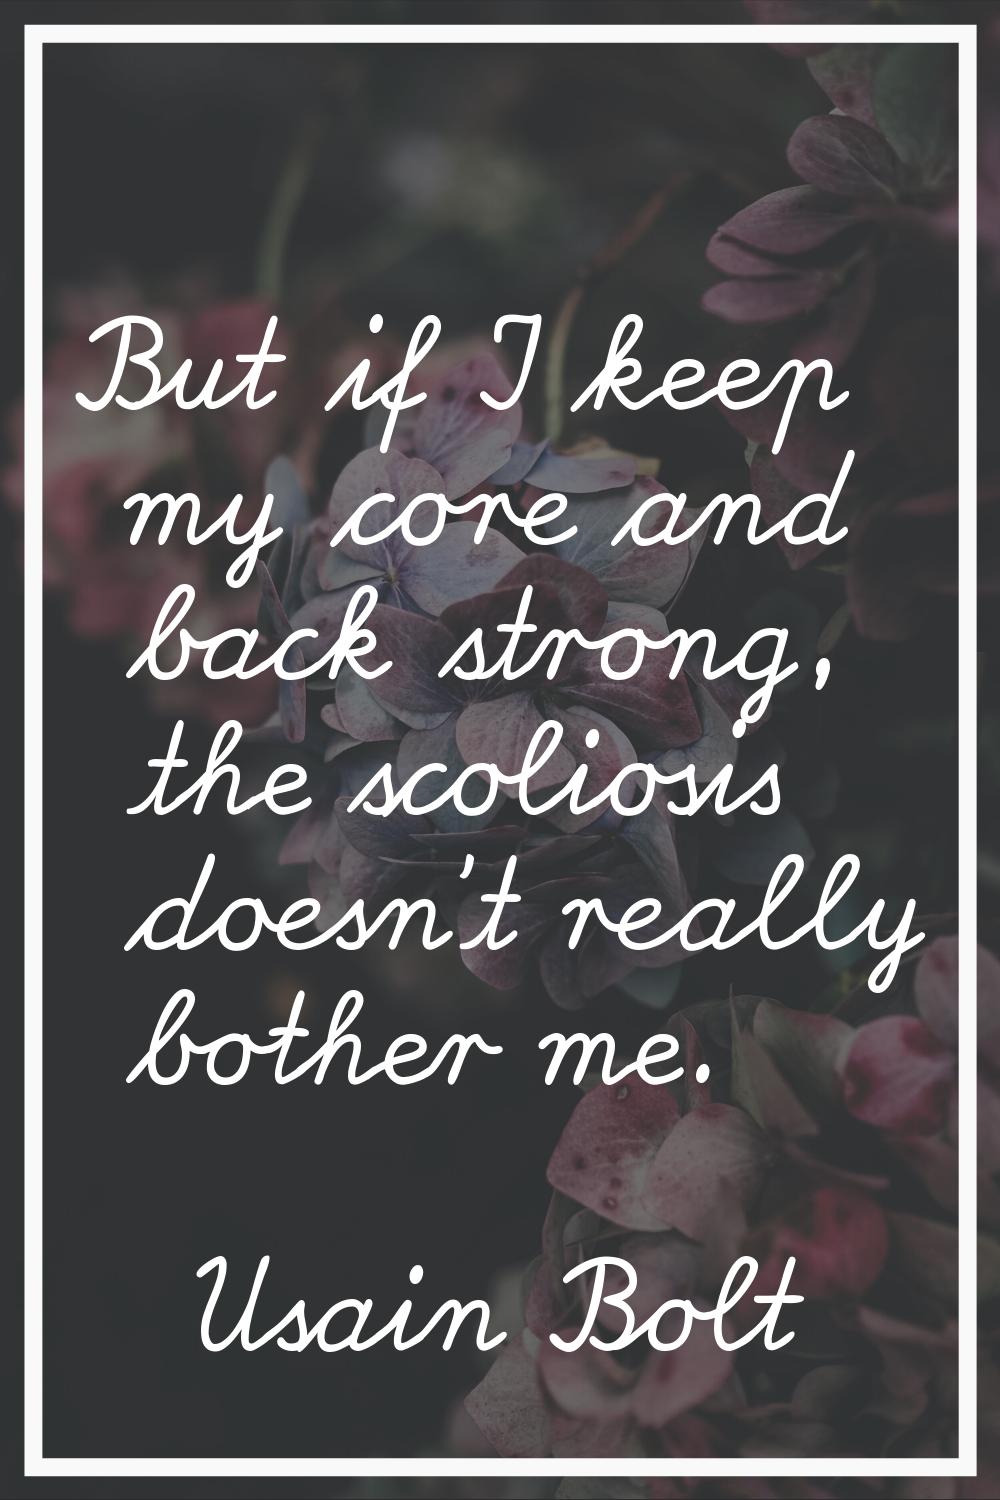 But if I keep my core and back strong, the scoliosis doesn't really bother me.